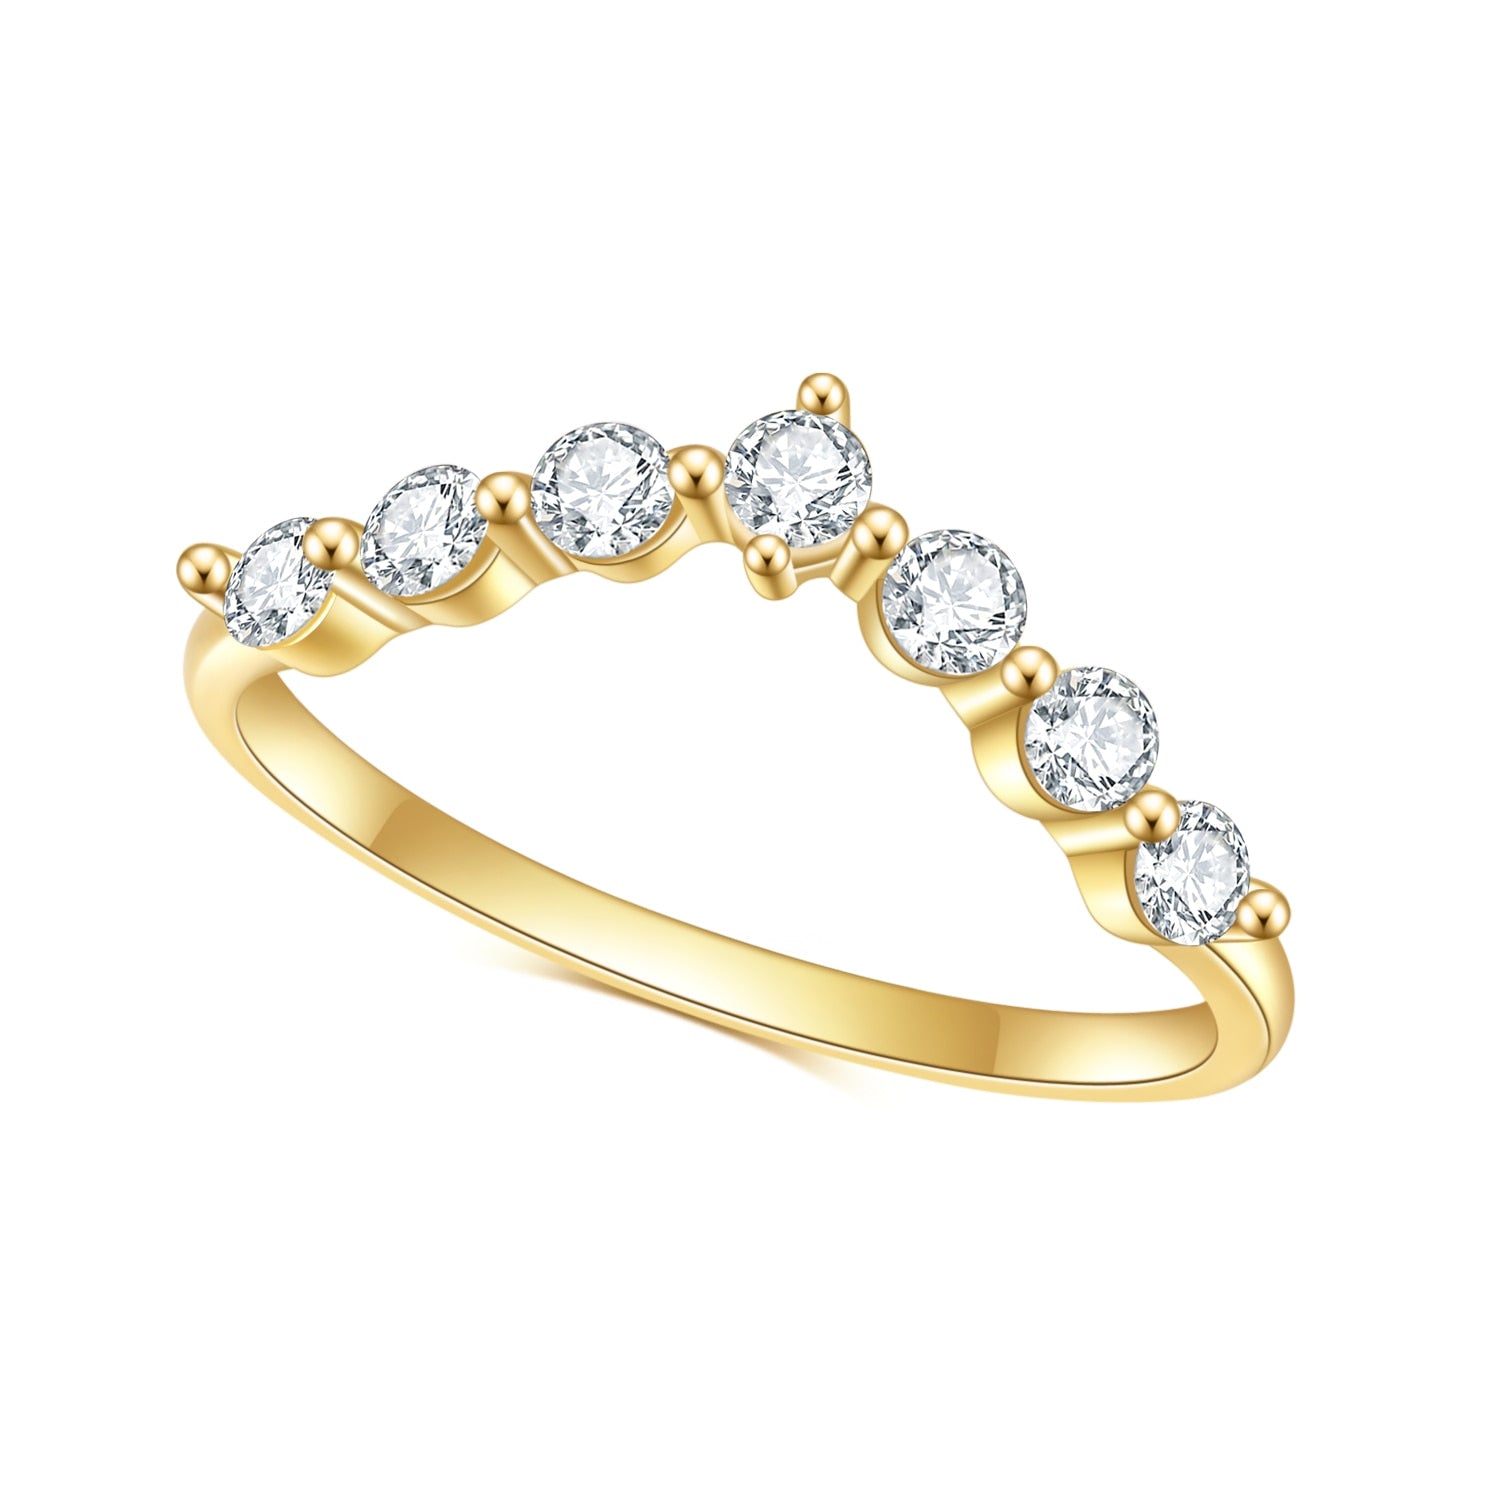 A gold chevron style wedding ring set with 7 round small moissanites.